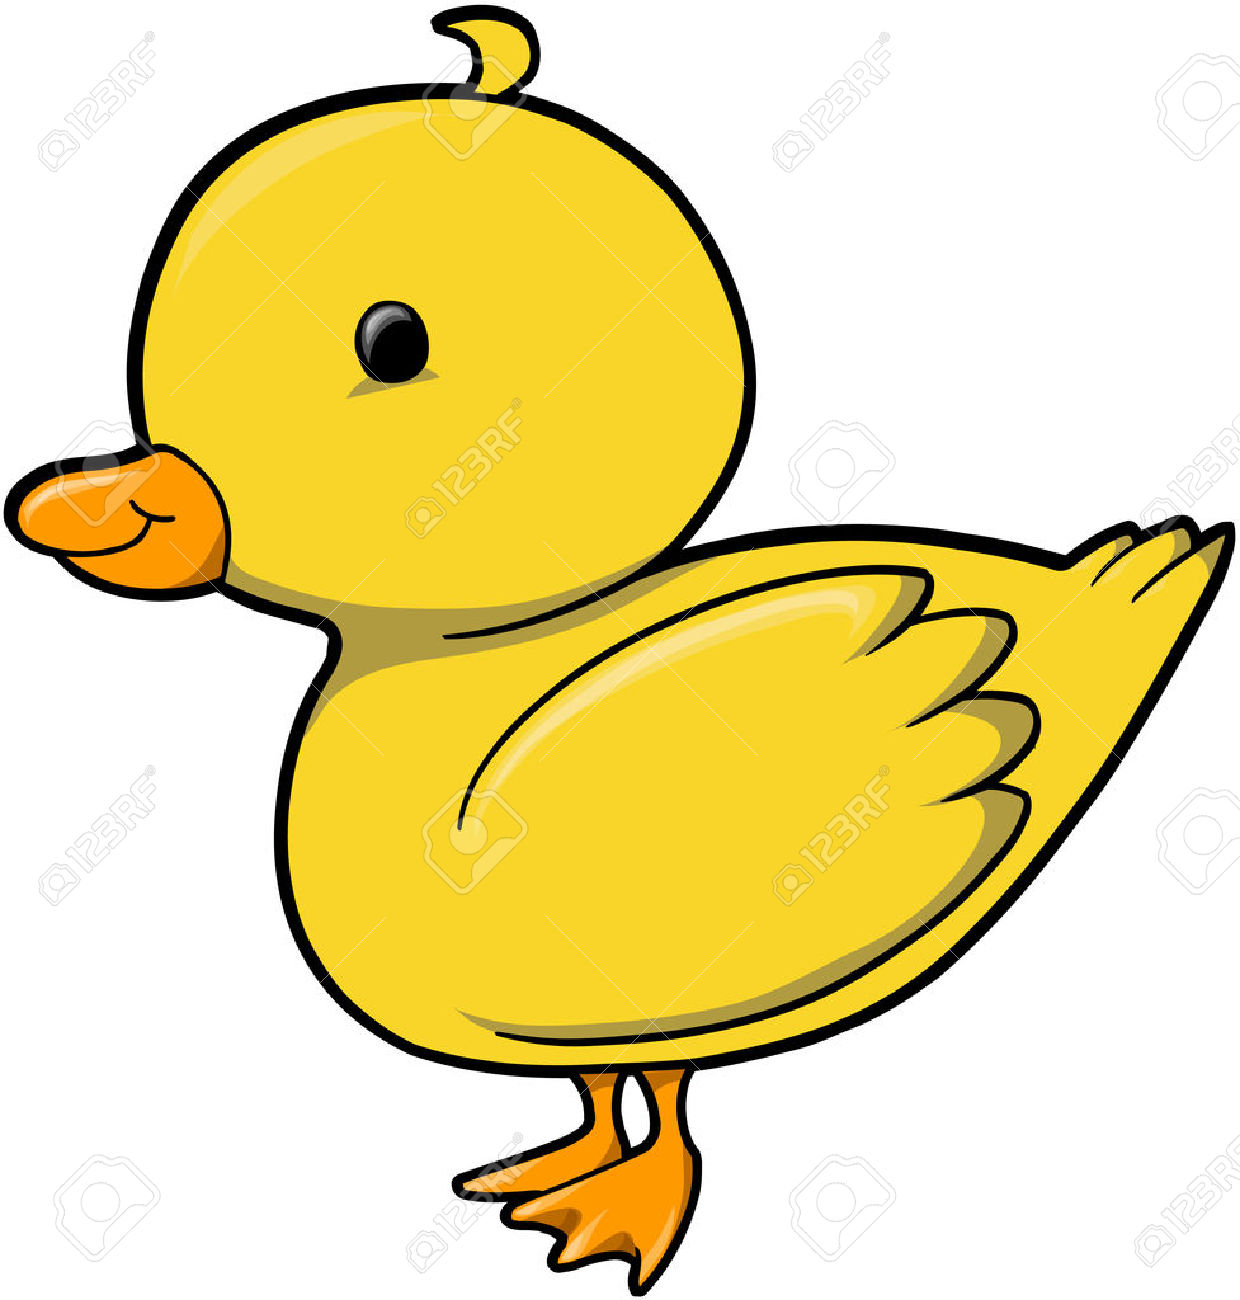 Duckling clipart group duck. And ducklings free download